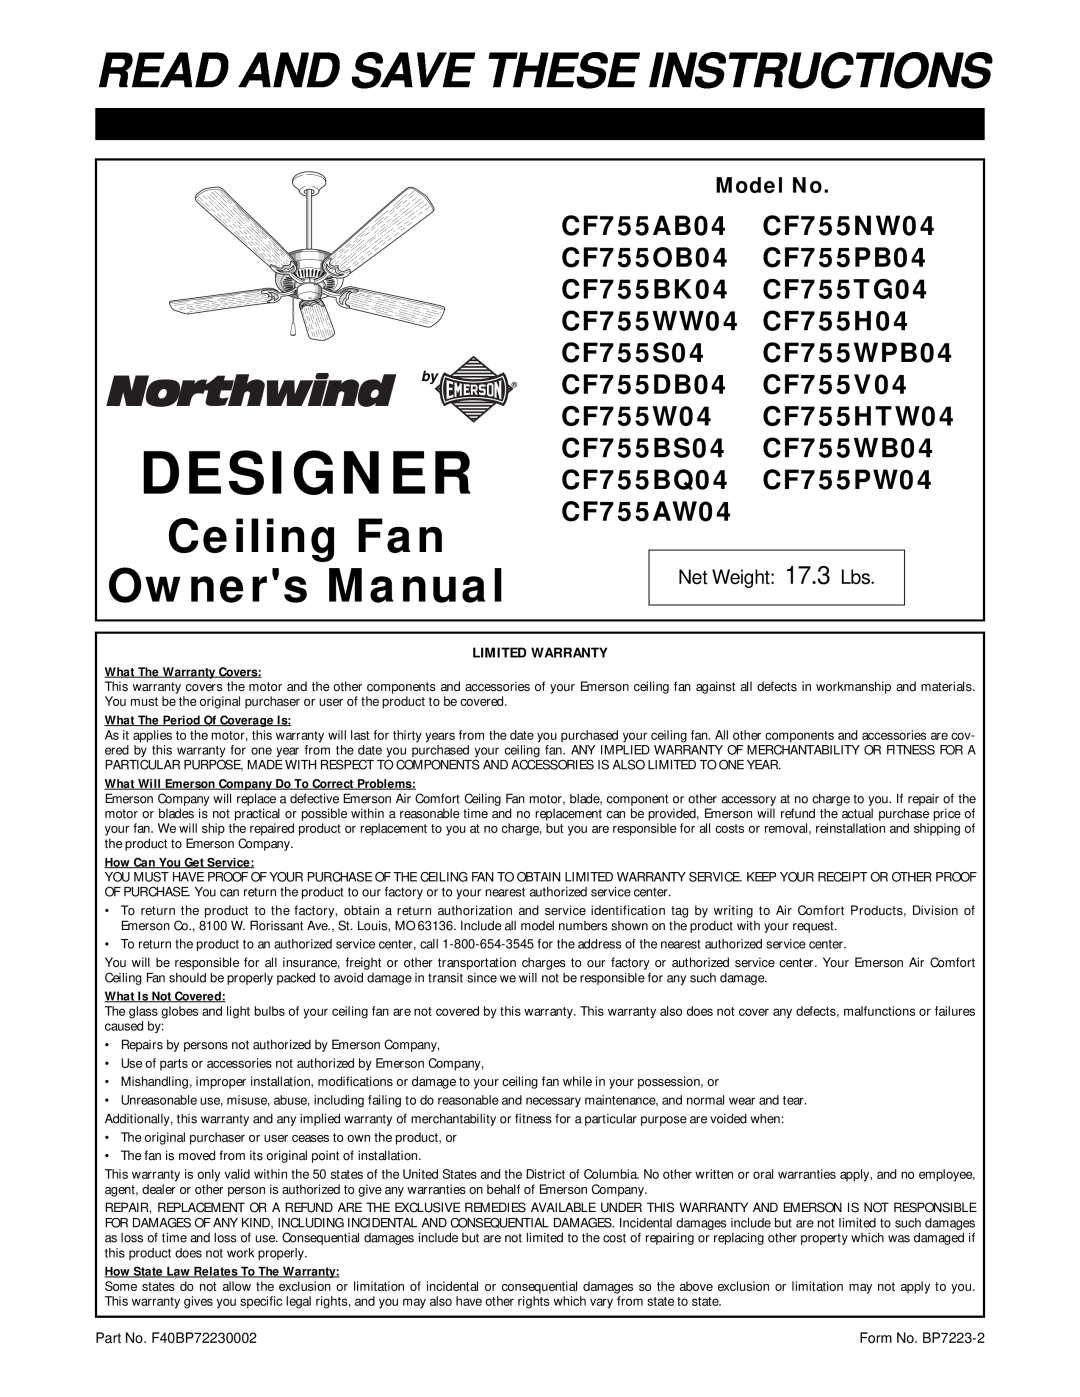 Emerson CF755WW04, CF755PW04, CF755NW04, CF755S04, CF755OB04 warranty Designer, Read And Save These Instructions, Ceiling Fan 